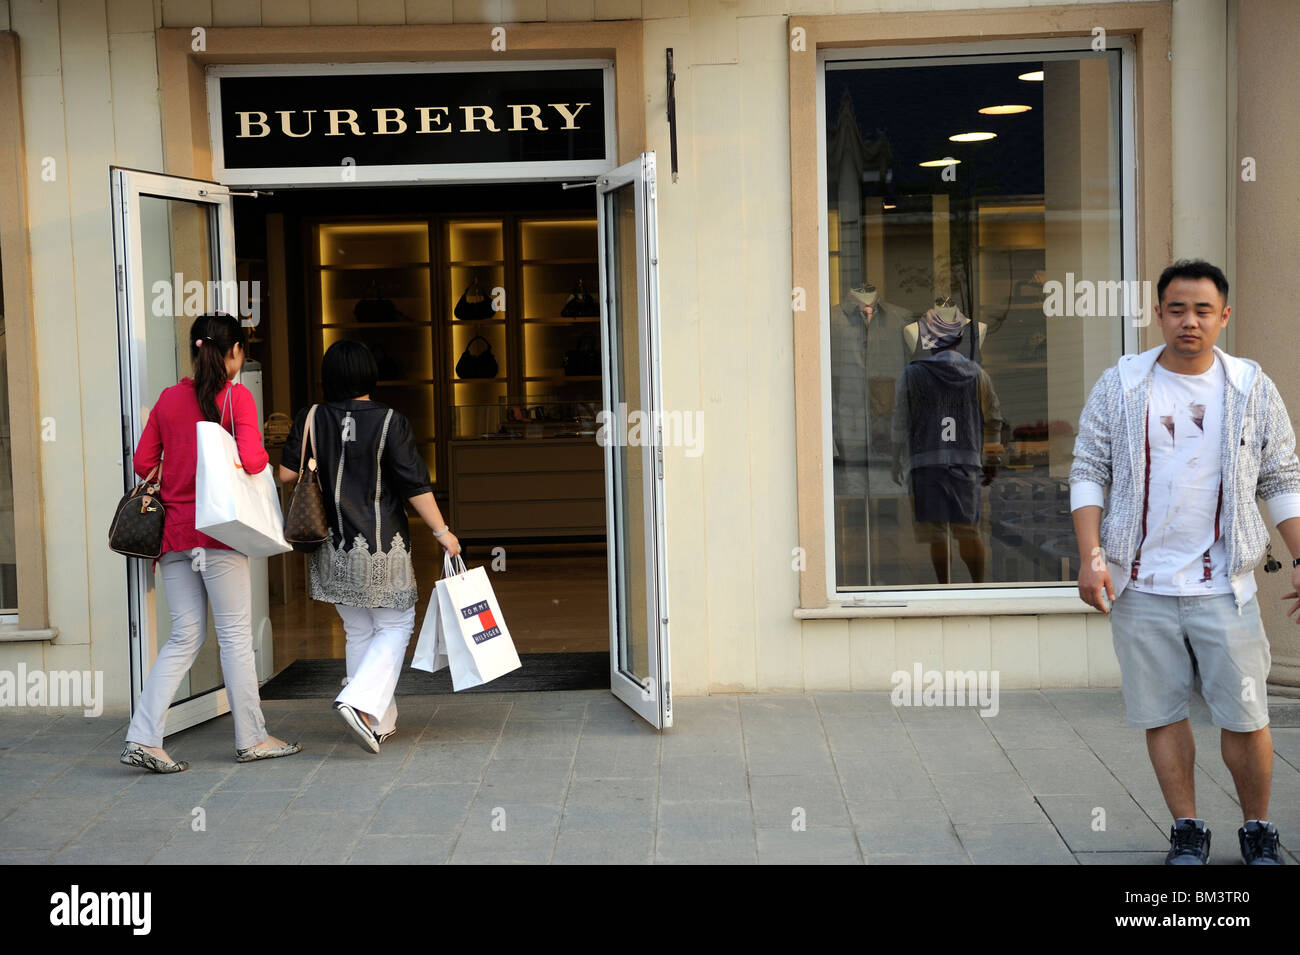 Burberry Store in Peking Scitech Premium Outlet Mall in Peking, China. 15. Mai 2010 Stockfoto